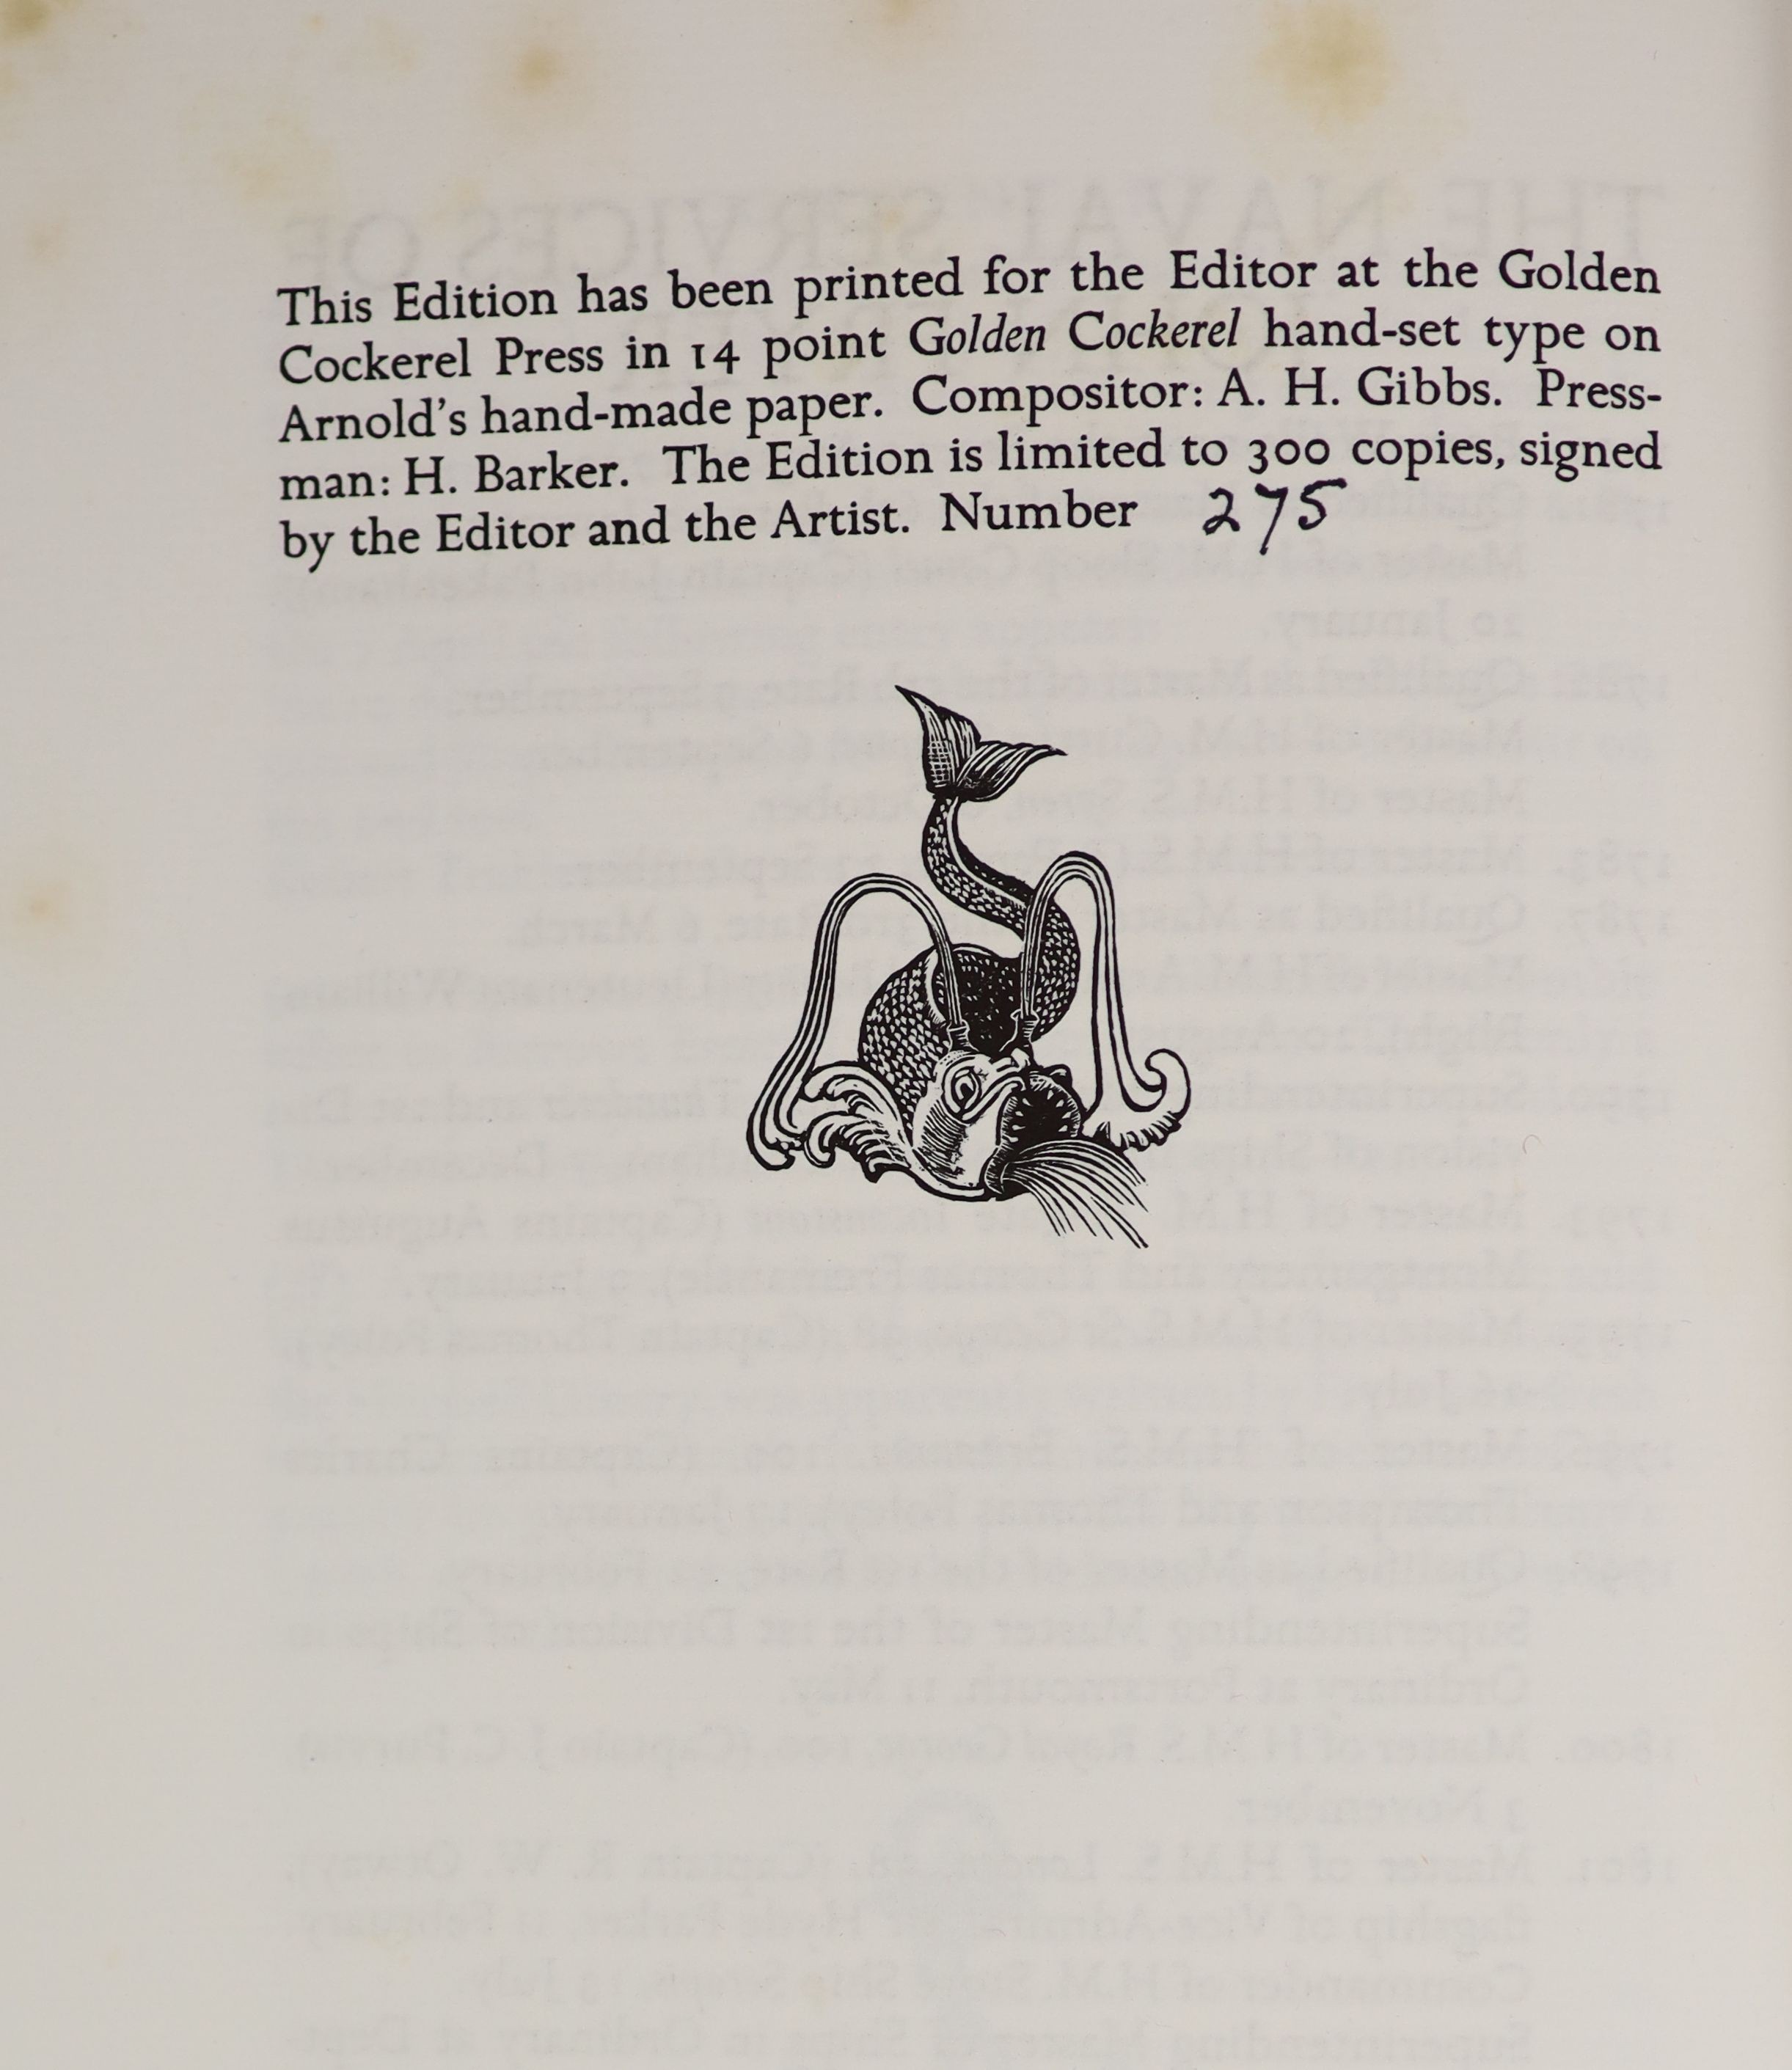 Golden Cockerel Press - Waltham Saint Lawrence, Berkshire- Fryer, Mary Ann - John Fryer of the Bounty, one of 300, blue cloth, spine and part of front board faded, spotting to final leaves, 1939